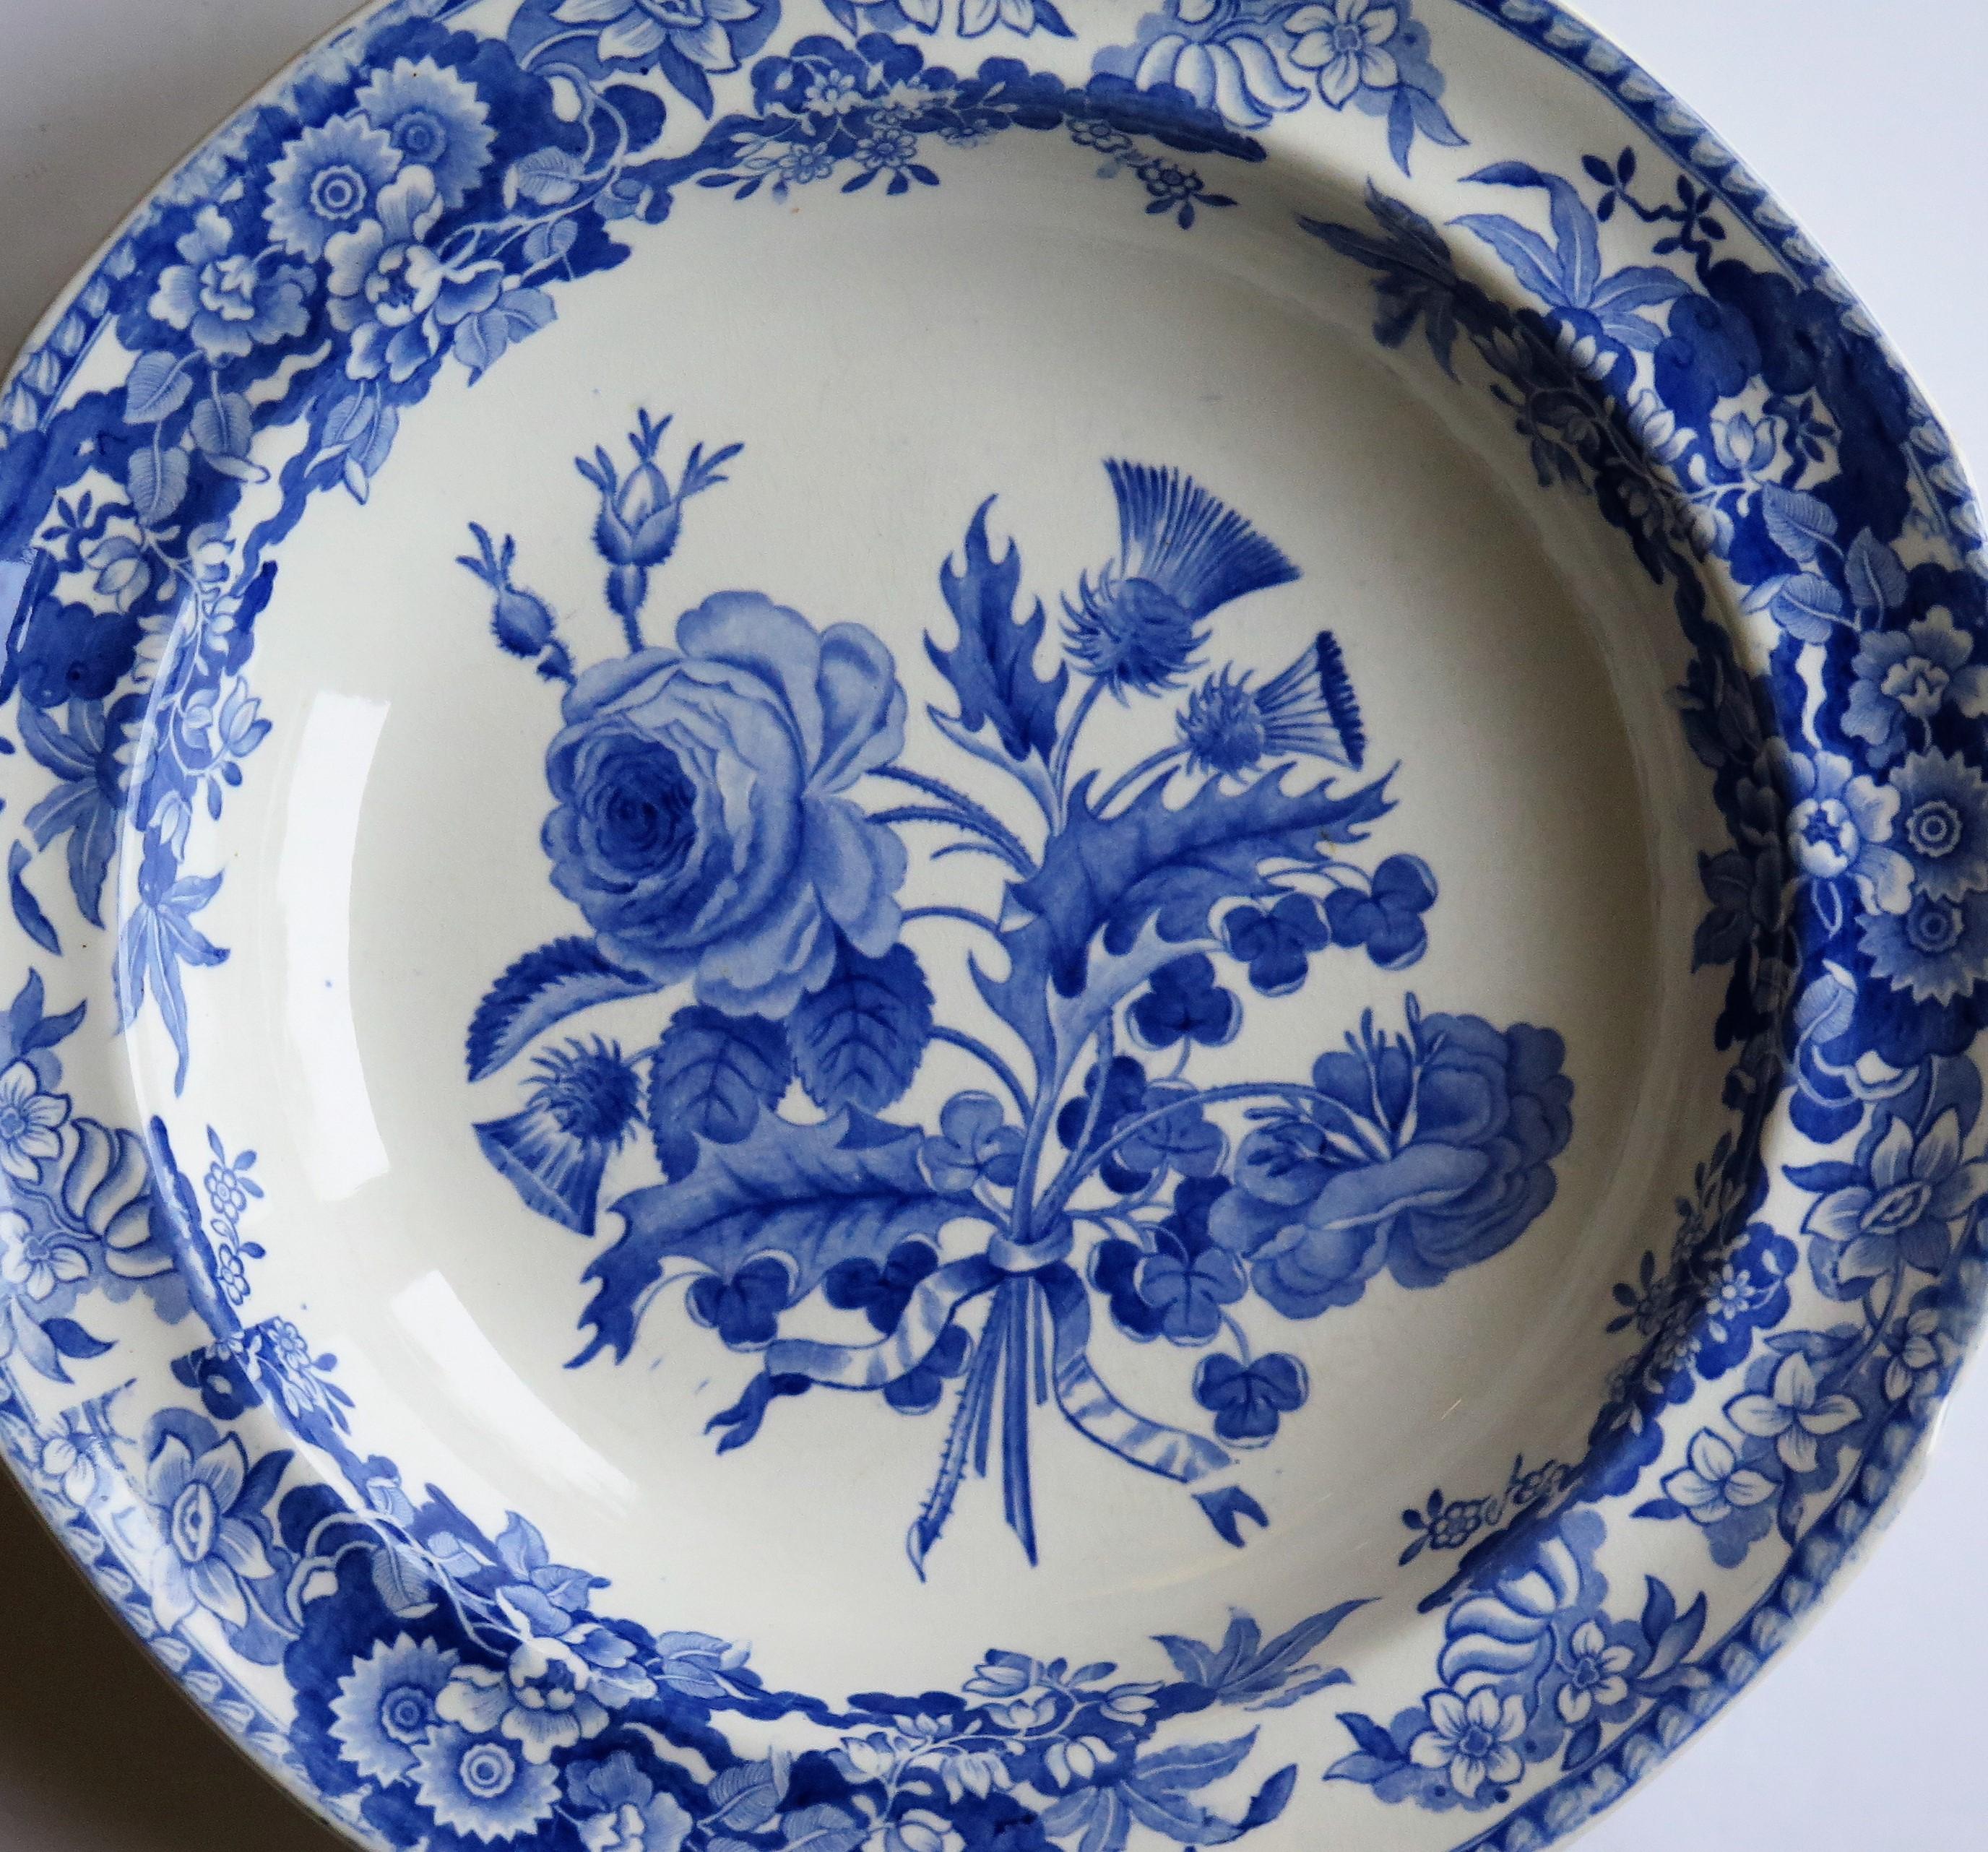 This is a beautiful deep plate or bowl in the blue and white Union Wreath Pattern No. 3, produced by the Spode factory and made of a type of earthenware pottery called Pearl-ware, in the early 19th century, circa 1820.

The pattern is called